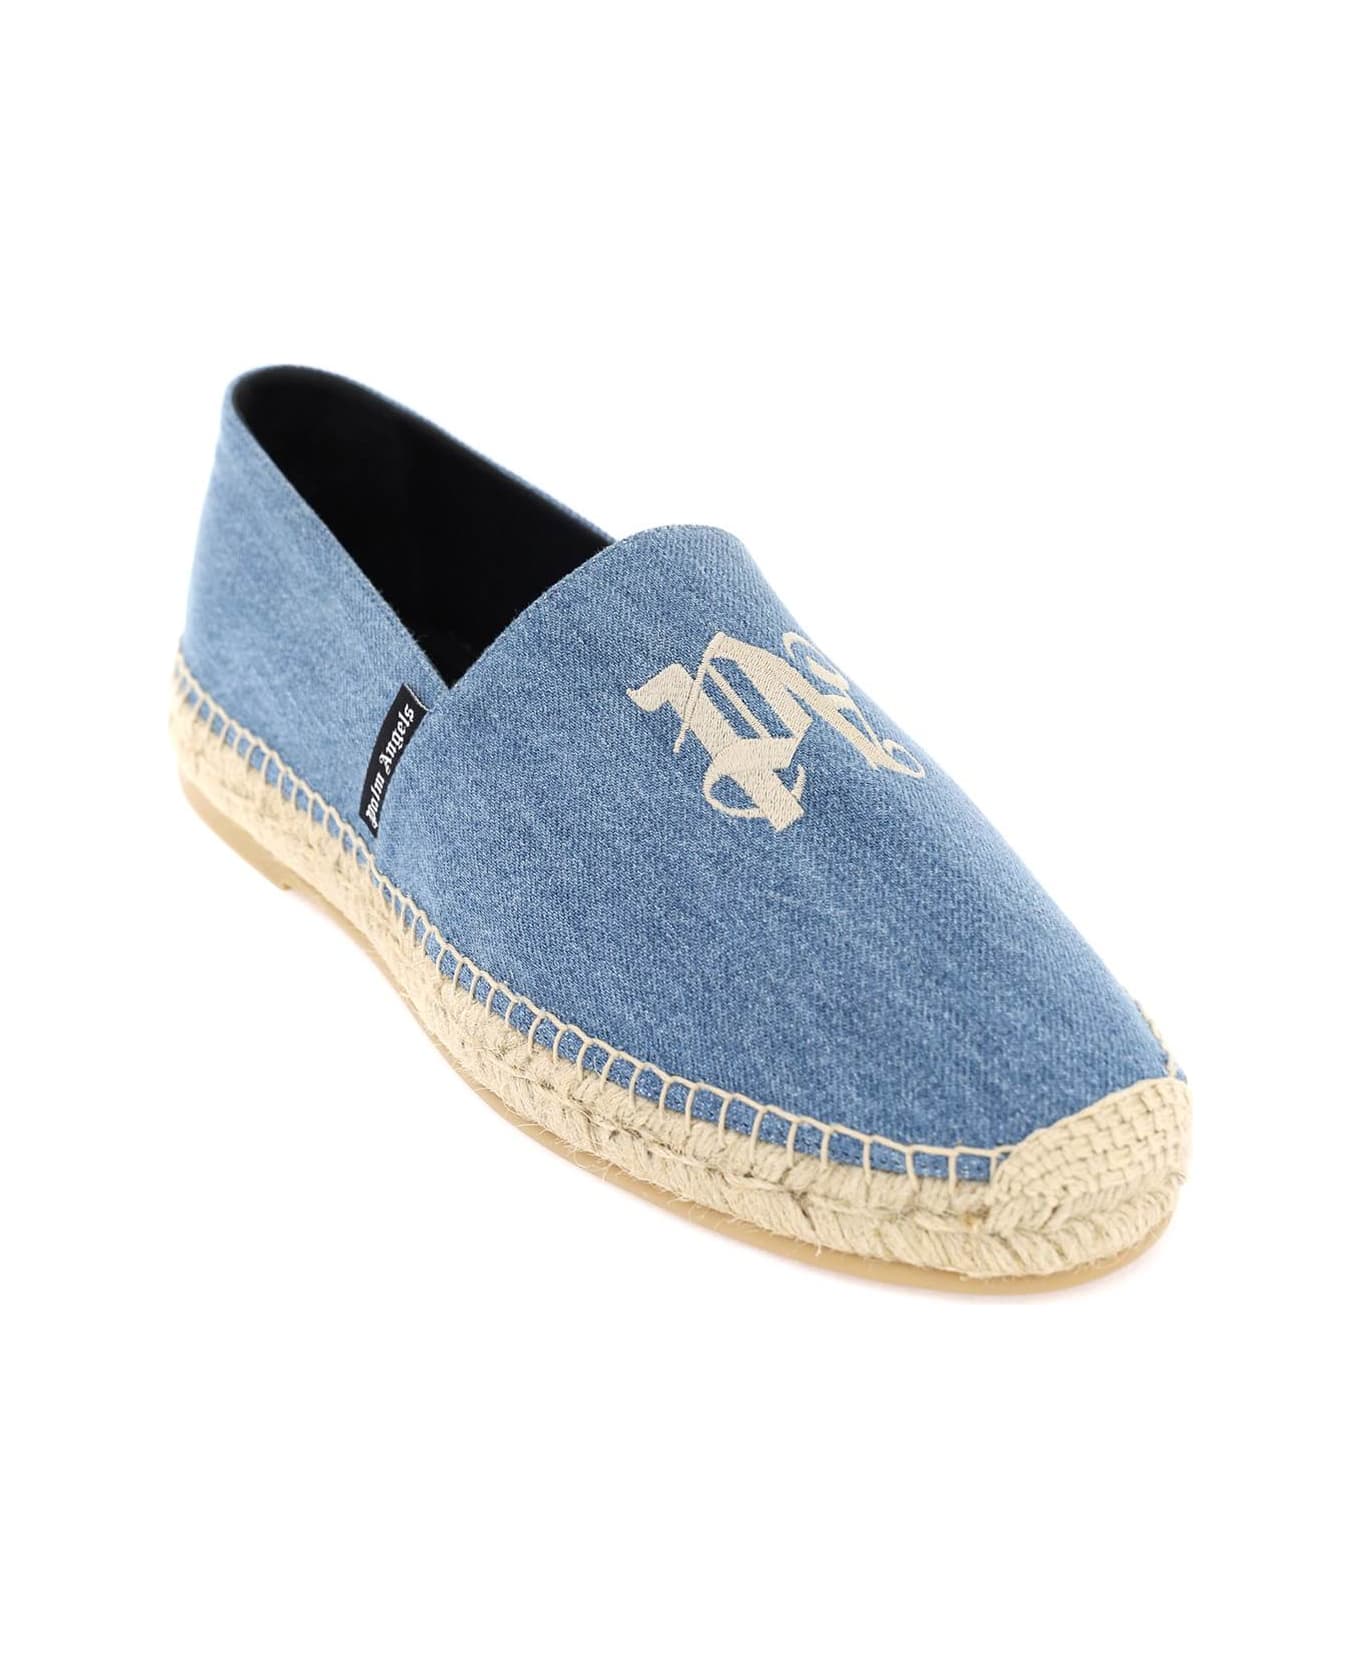 Palm Angels Espadrilles With Embroidered Logo - BLUE NO COLOR (Blue)